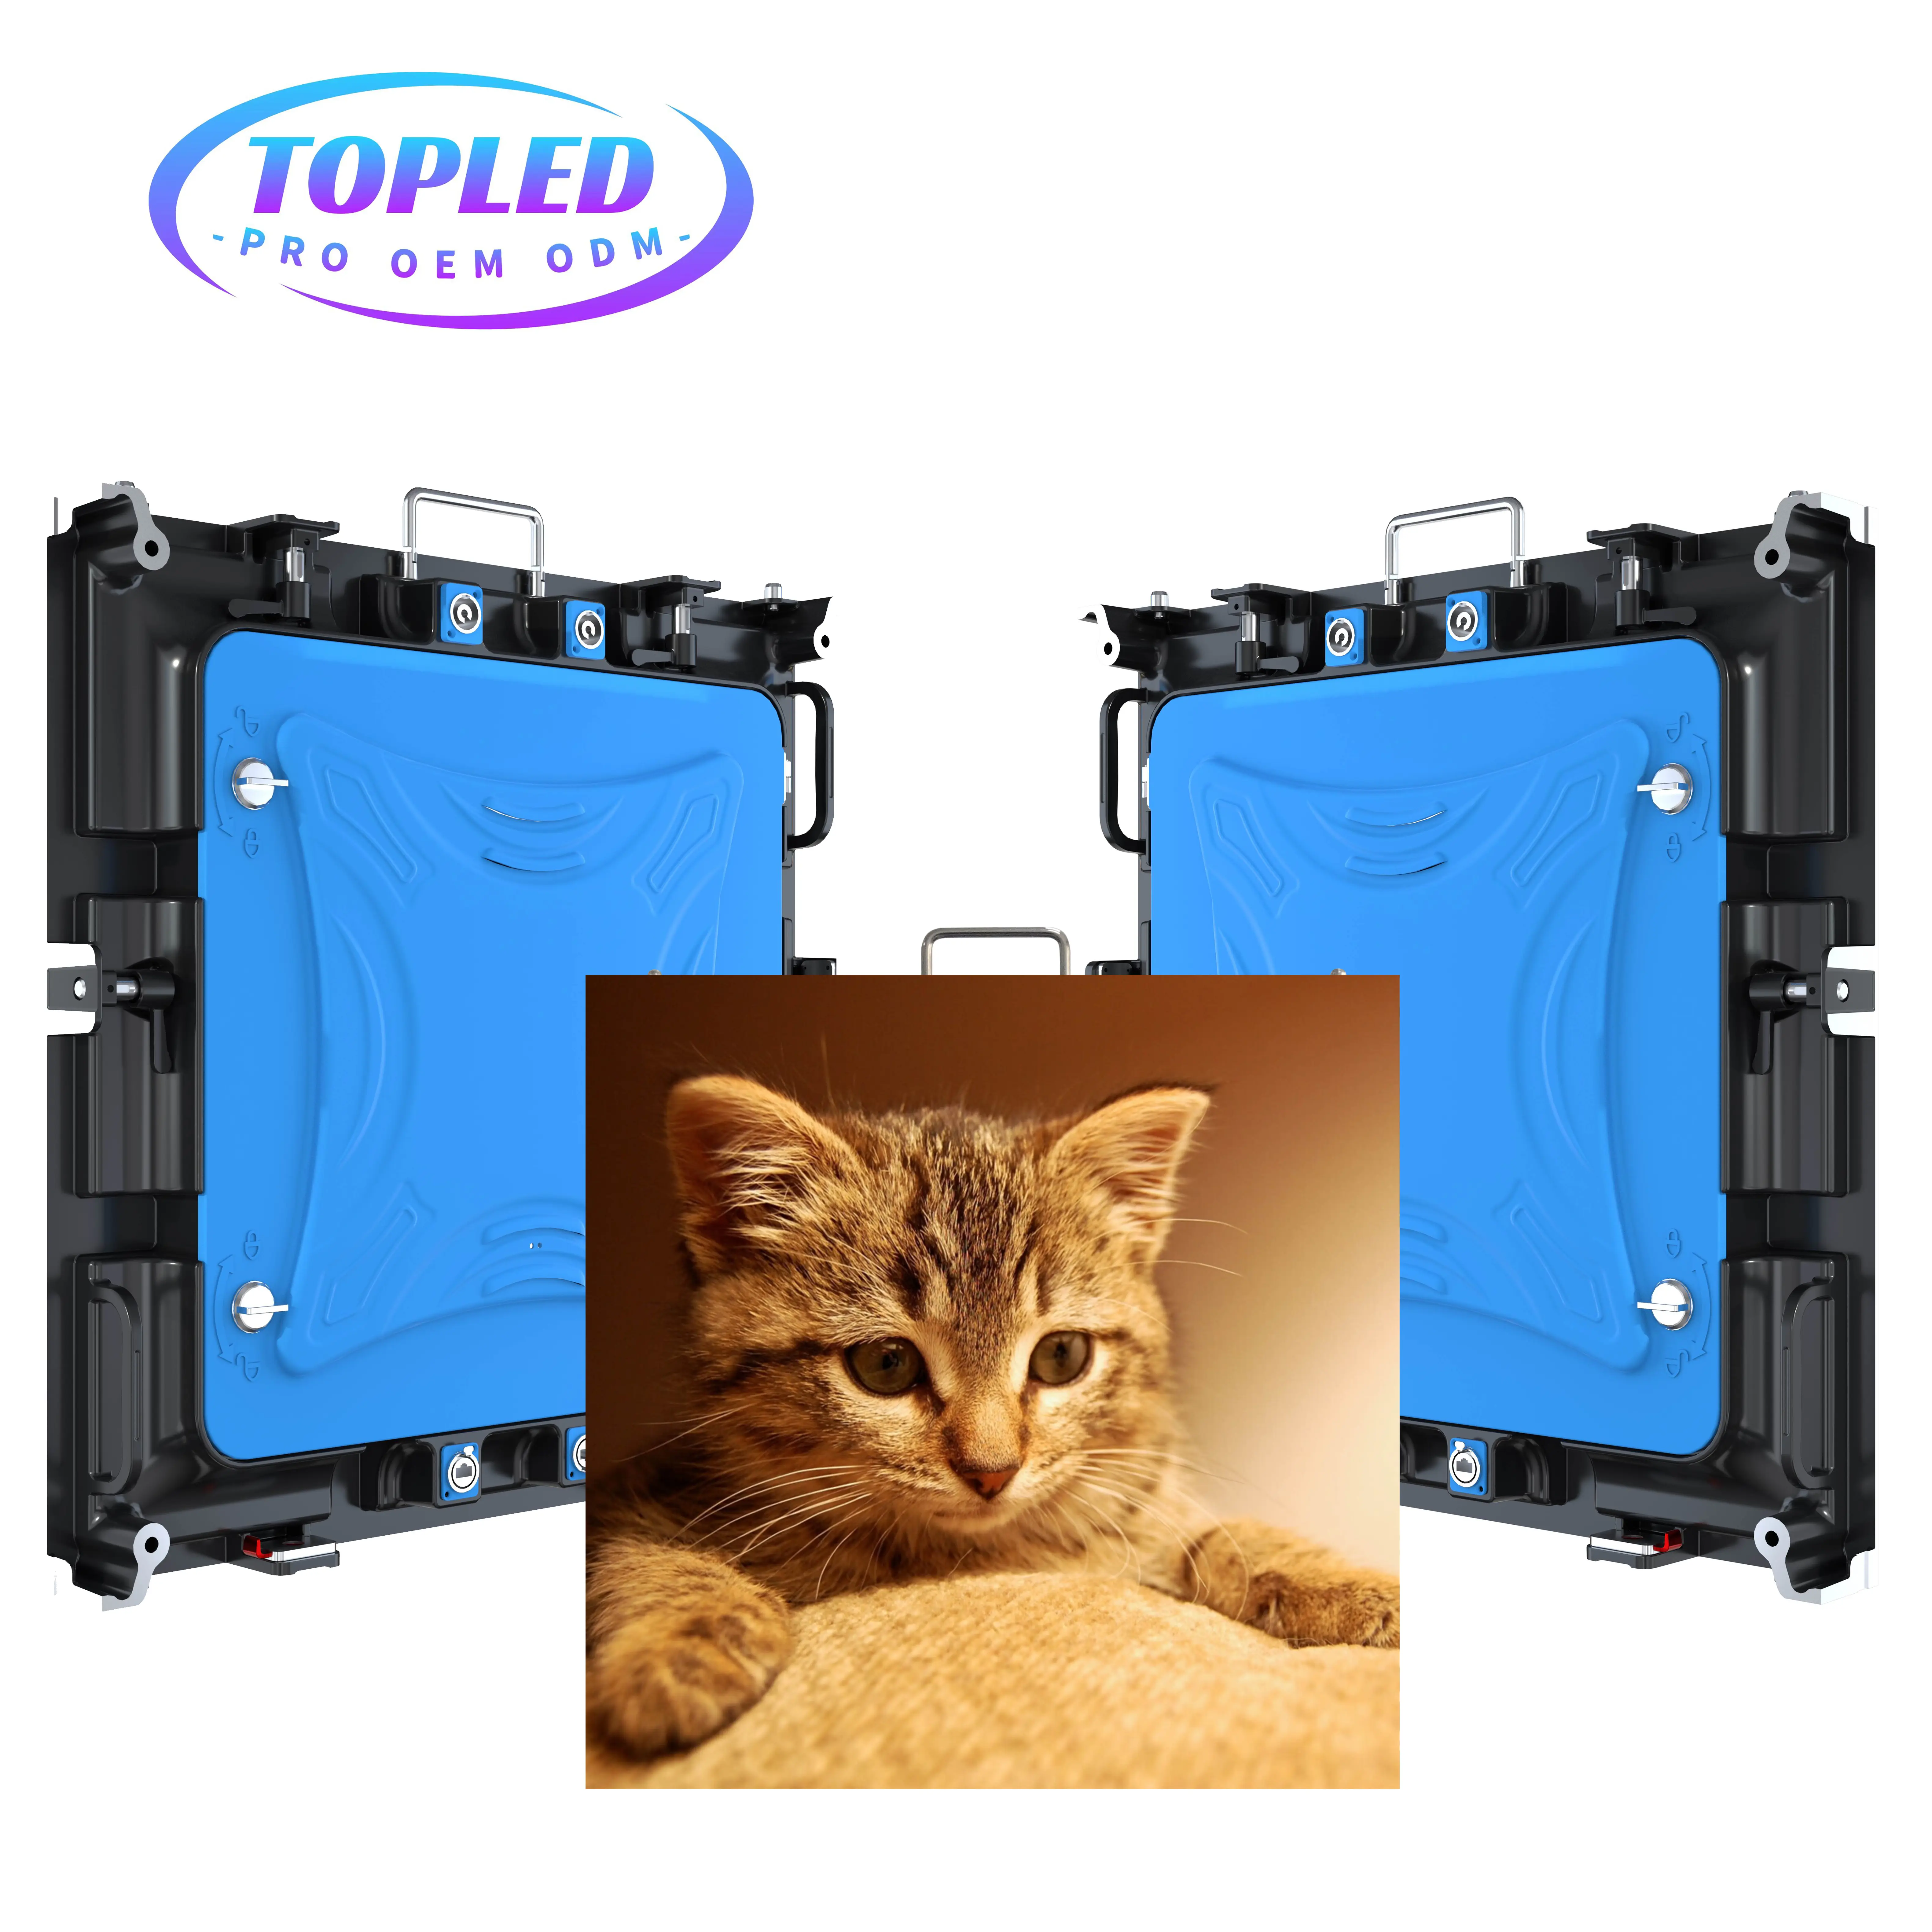 TOPLED truck mobile high brightness p5 sexi movies p6 chinese videos hd full color tv screen led display rental